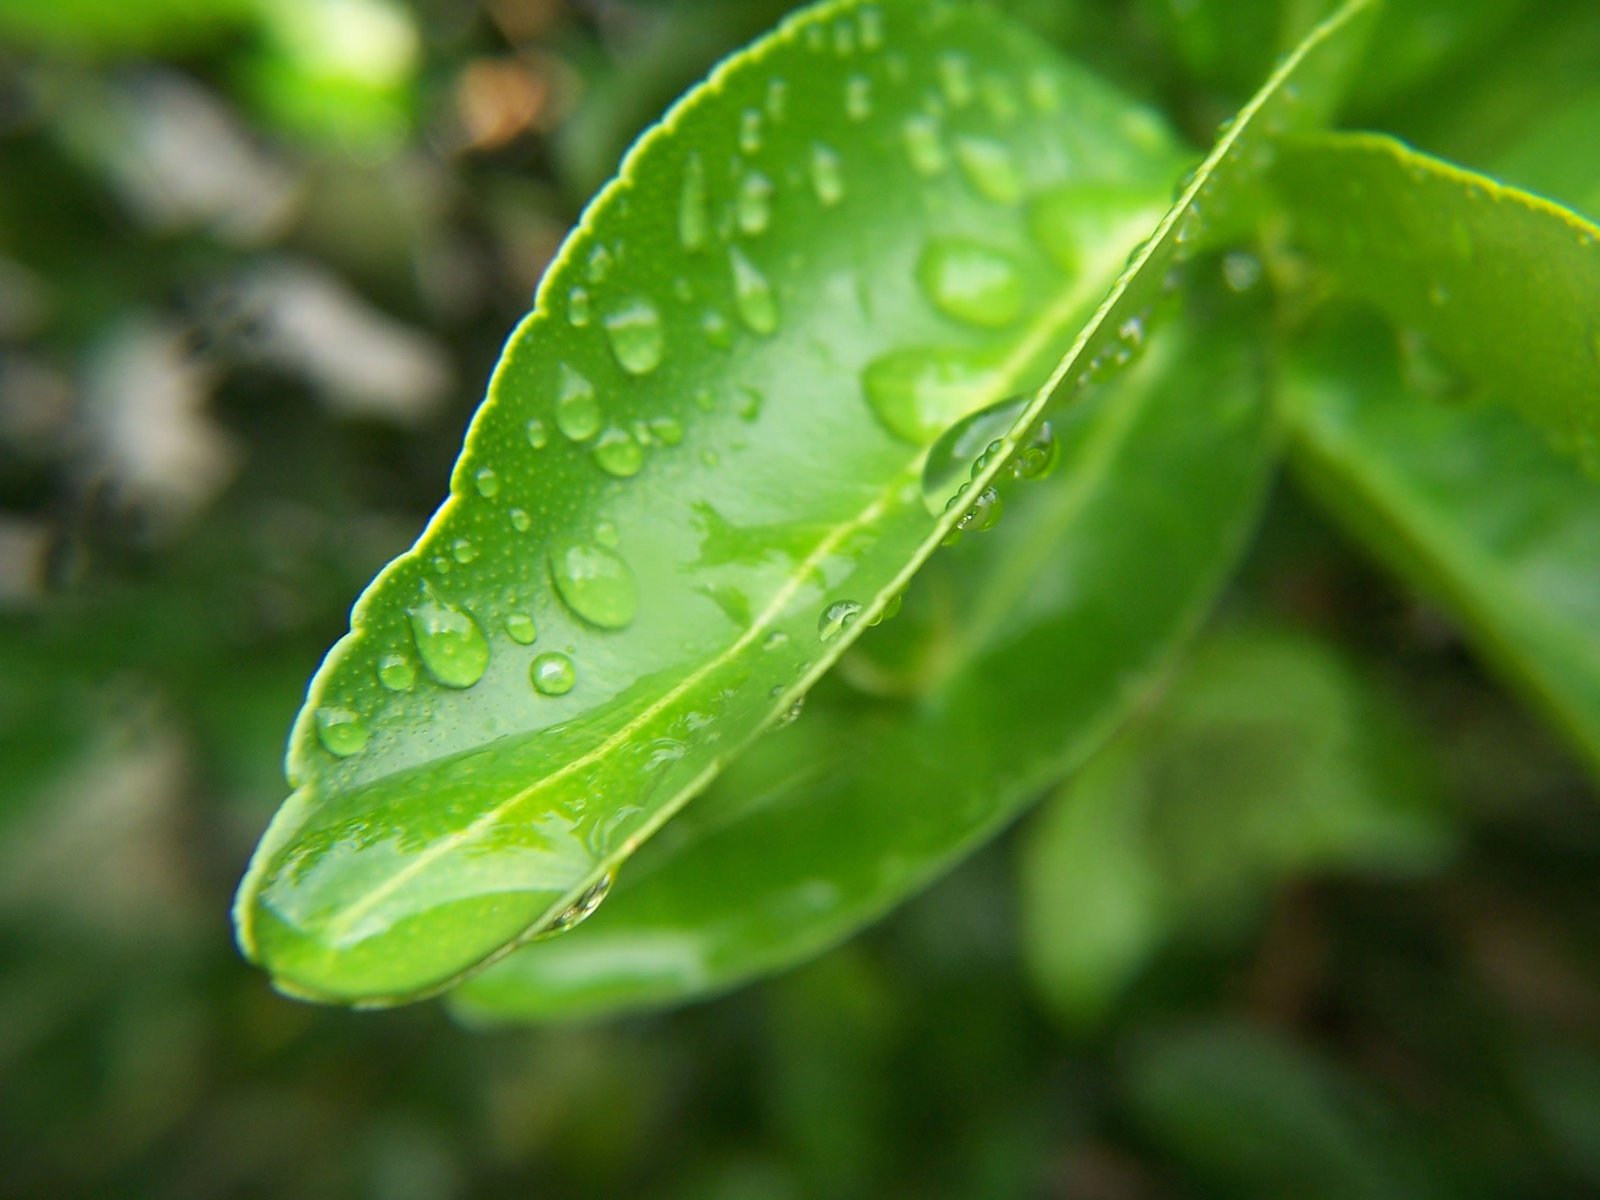 a close - up po of water droplets on a green plant